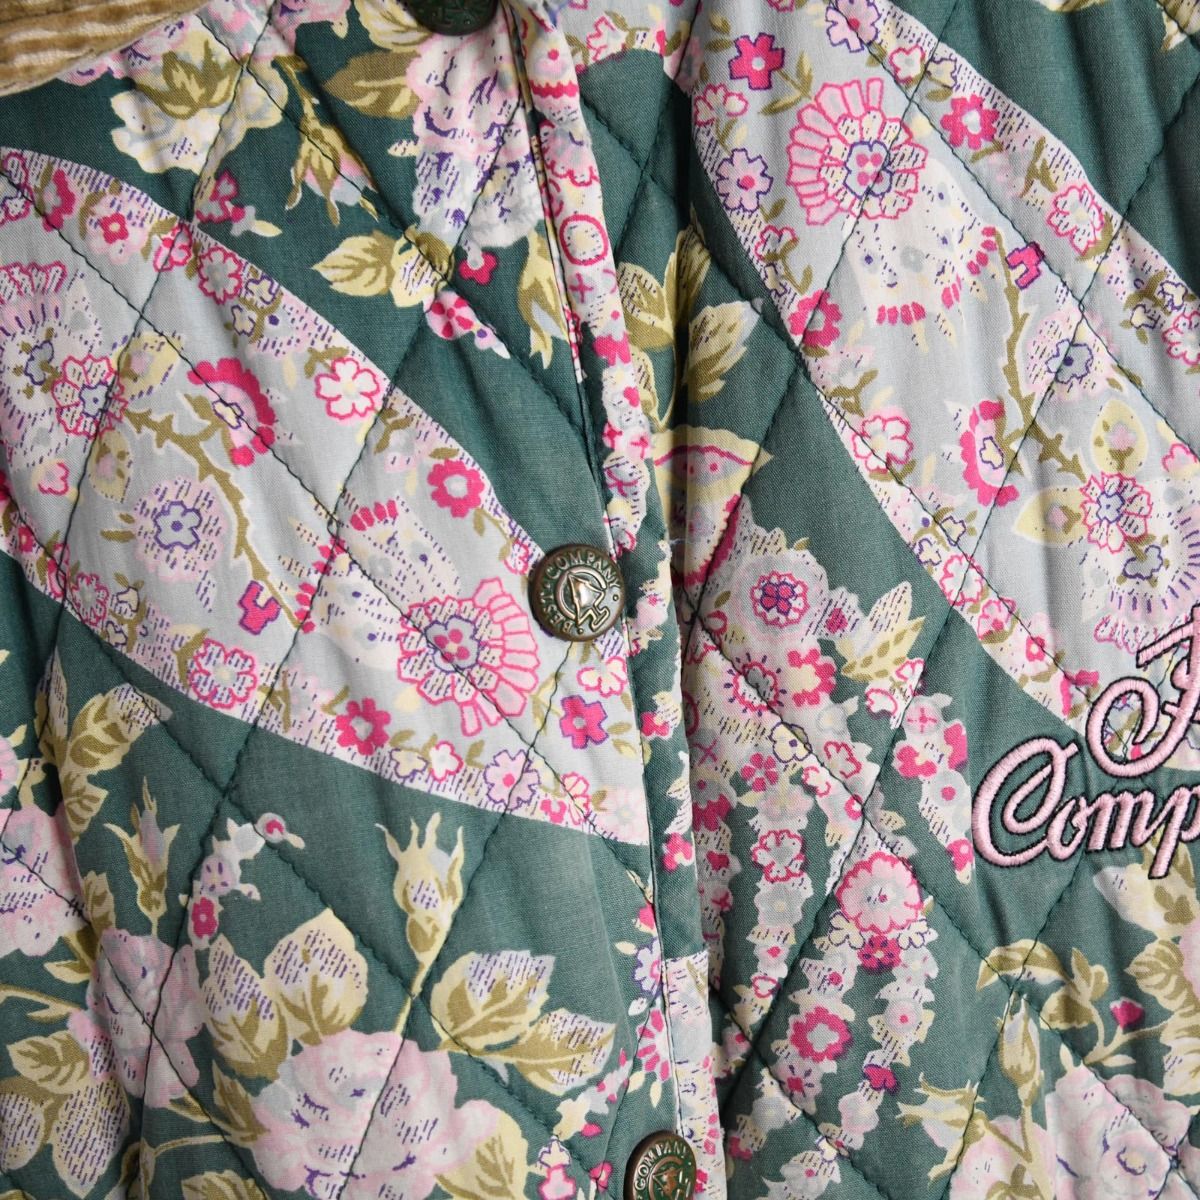 Best Company 1980s Quilted Floral Jacket